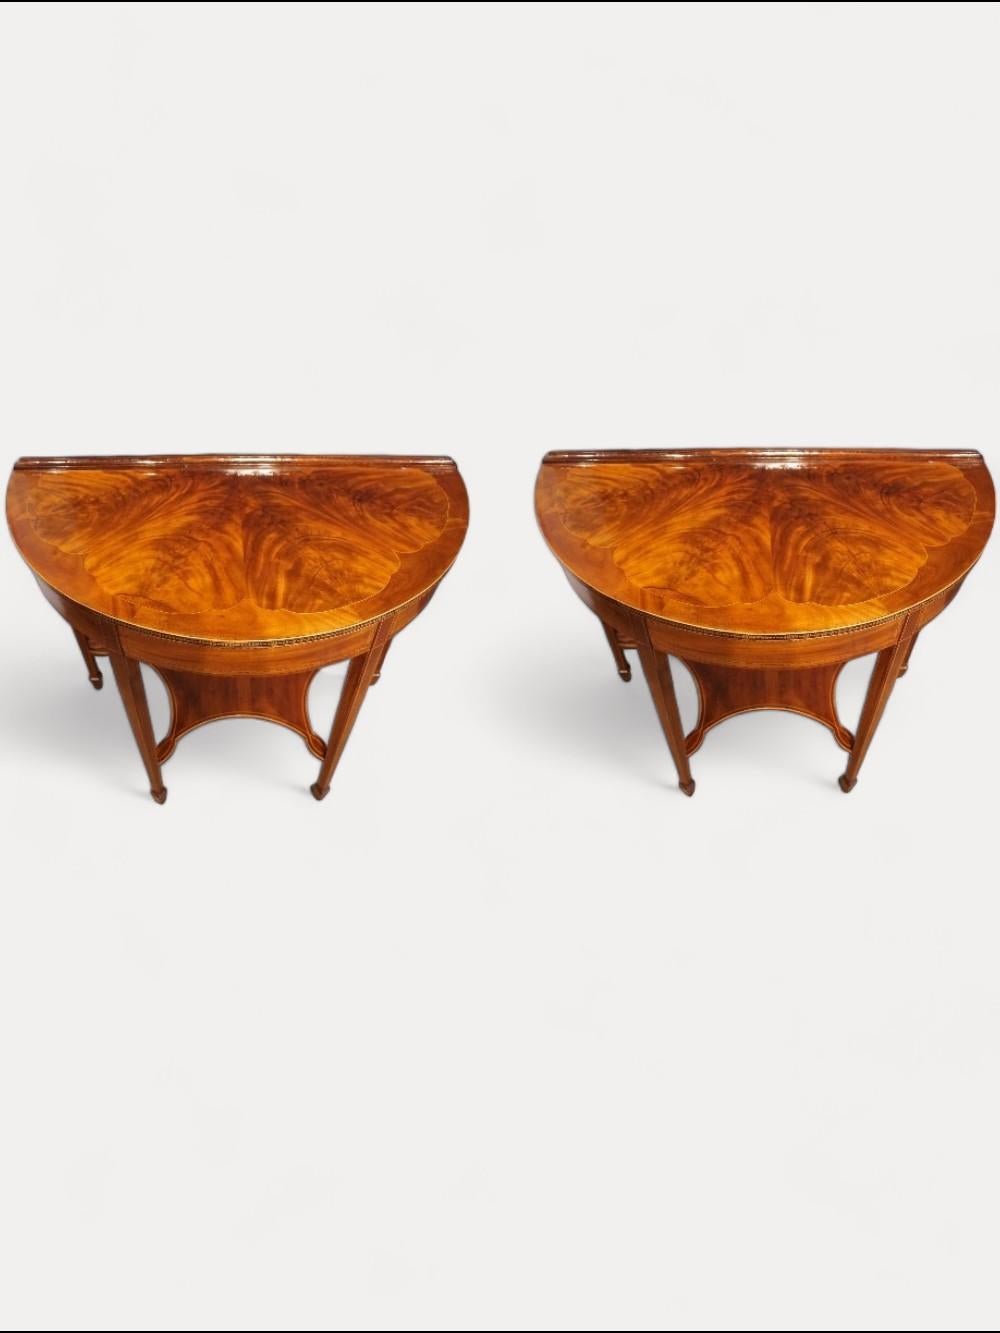 Pair of Edwardian demi-lune tables
This pair of Edwardian demi-lune tables were made circa 1910.
Each table having square tapered legs ending with spade feet.
The half round tops with the shaped inlay designs enclosing fine flame mahogany panels.
A